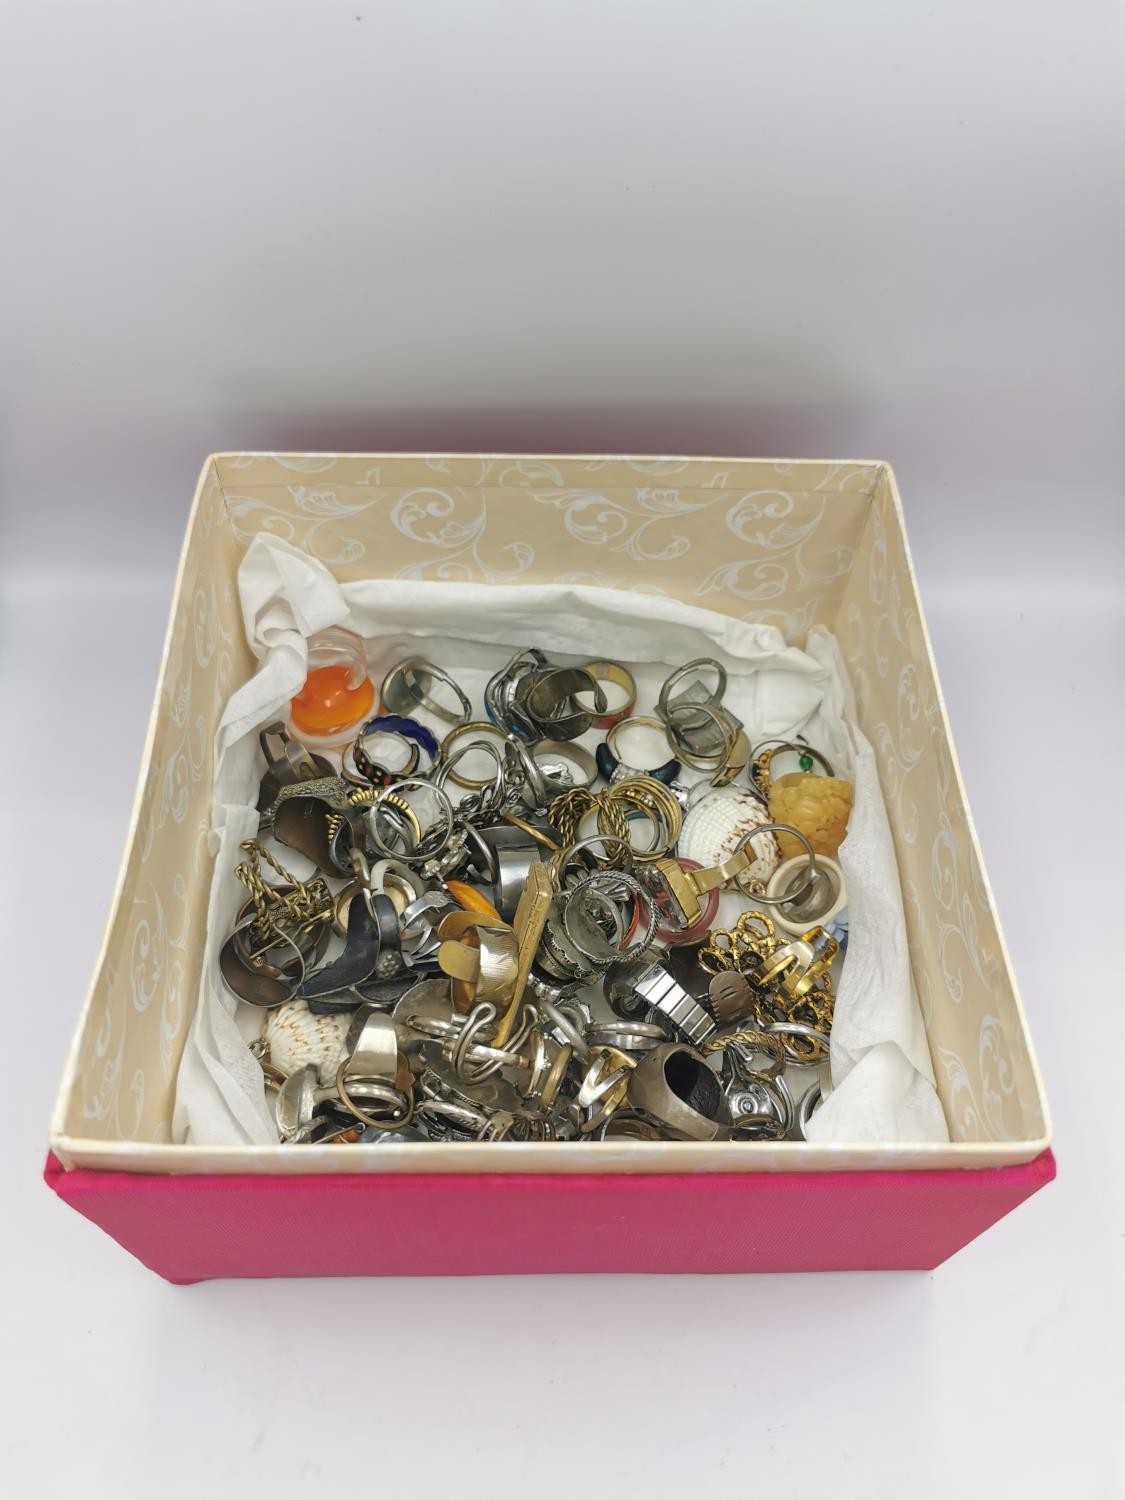 A large collection of vintage and antique rings of various designs.